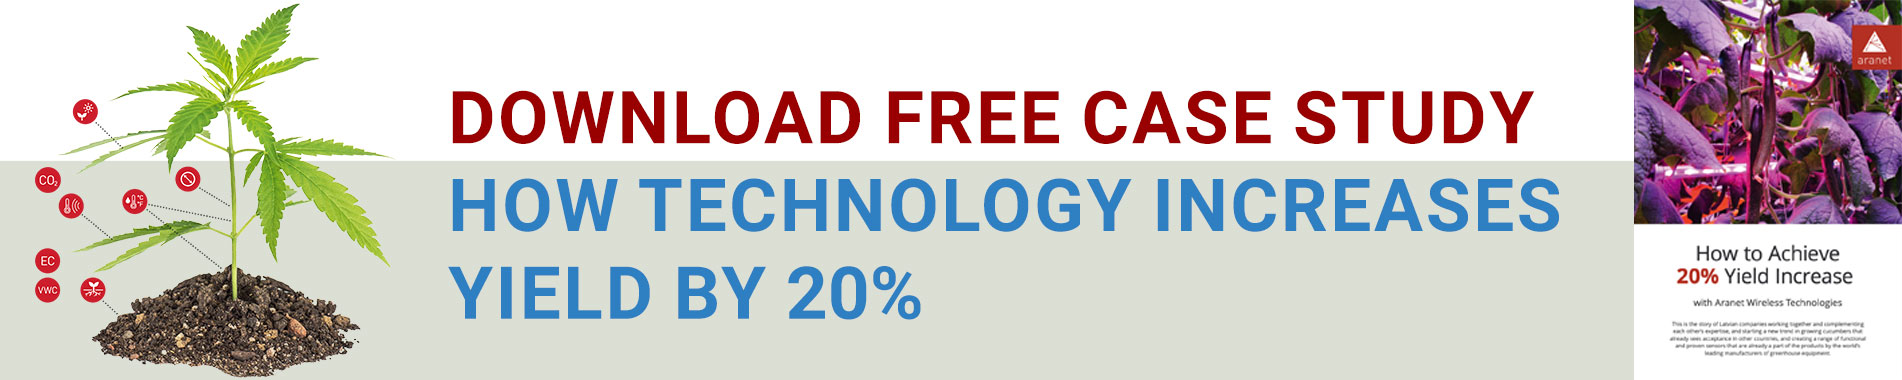 CASE STUDY : HOW TO ACHIEVE 20% Yield Increase with technology